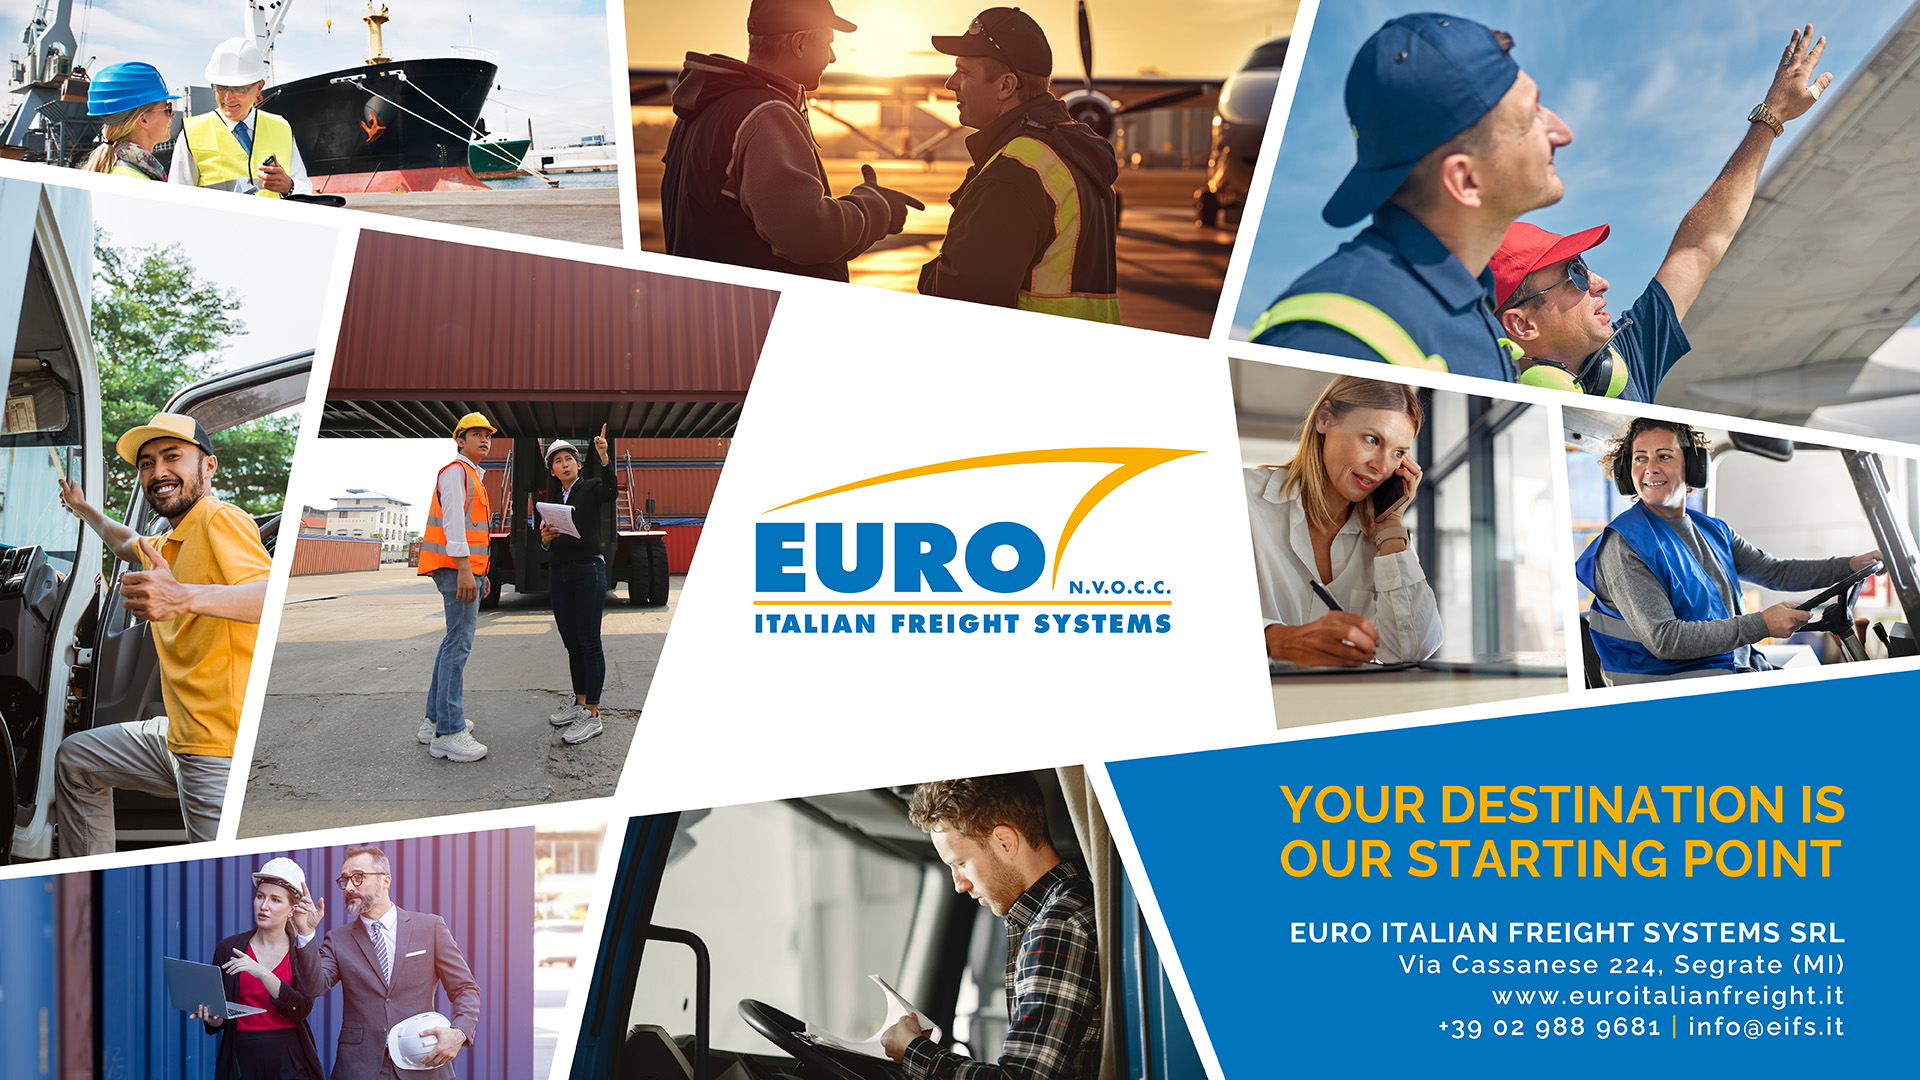 Euro Italian Freight Systems: shipping services to move your goods anywhere